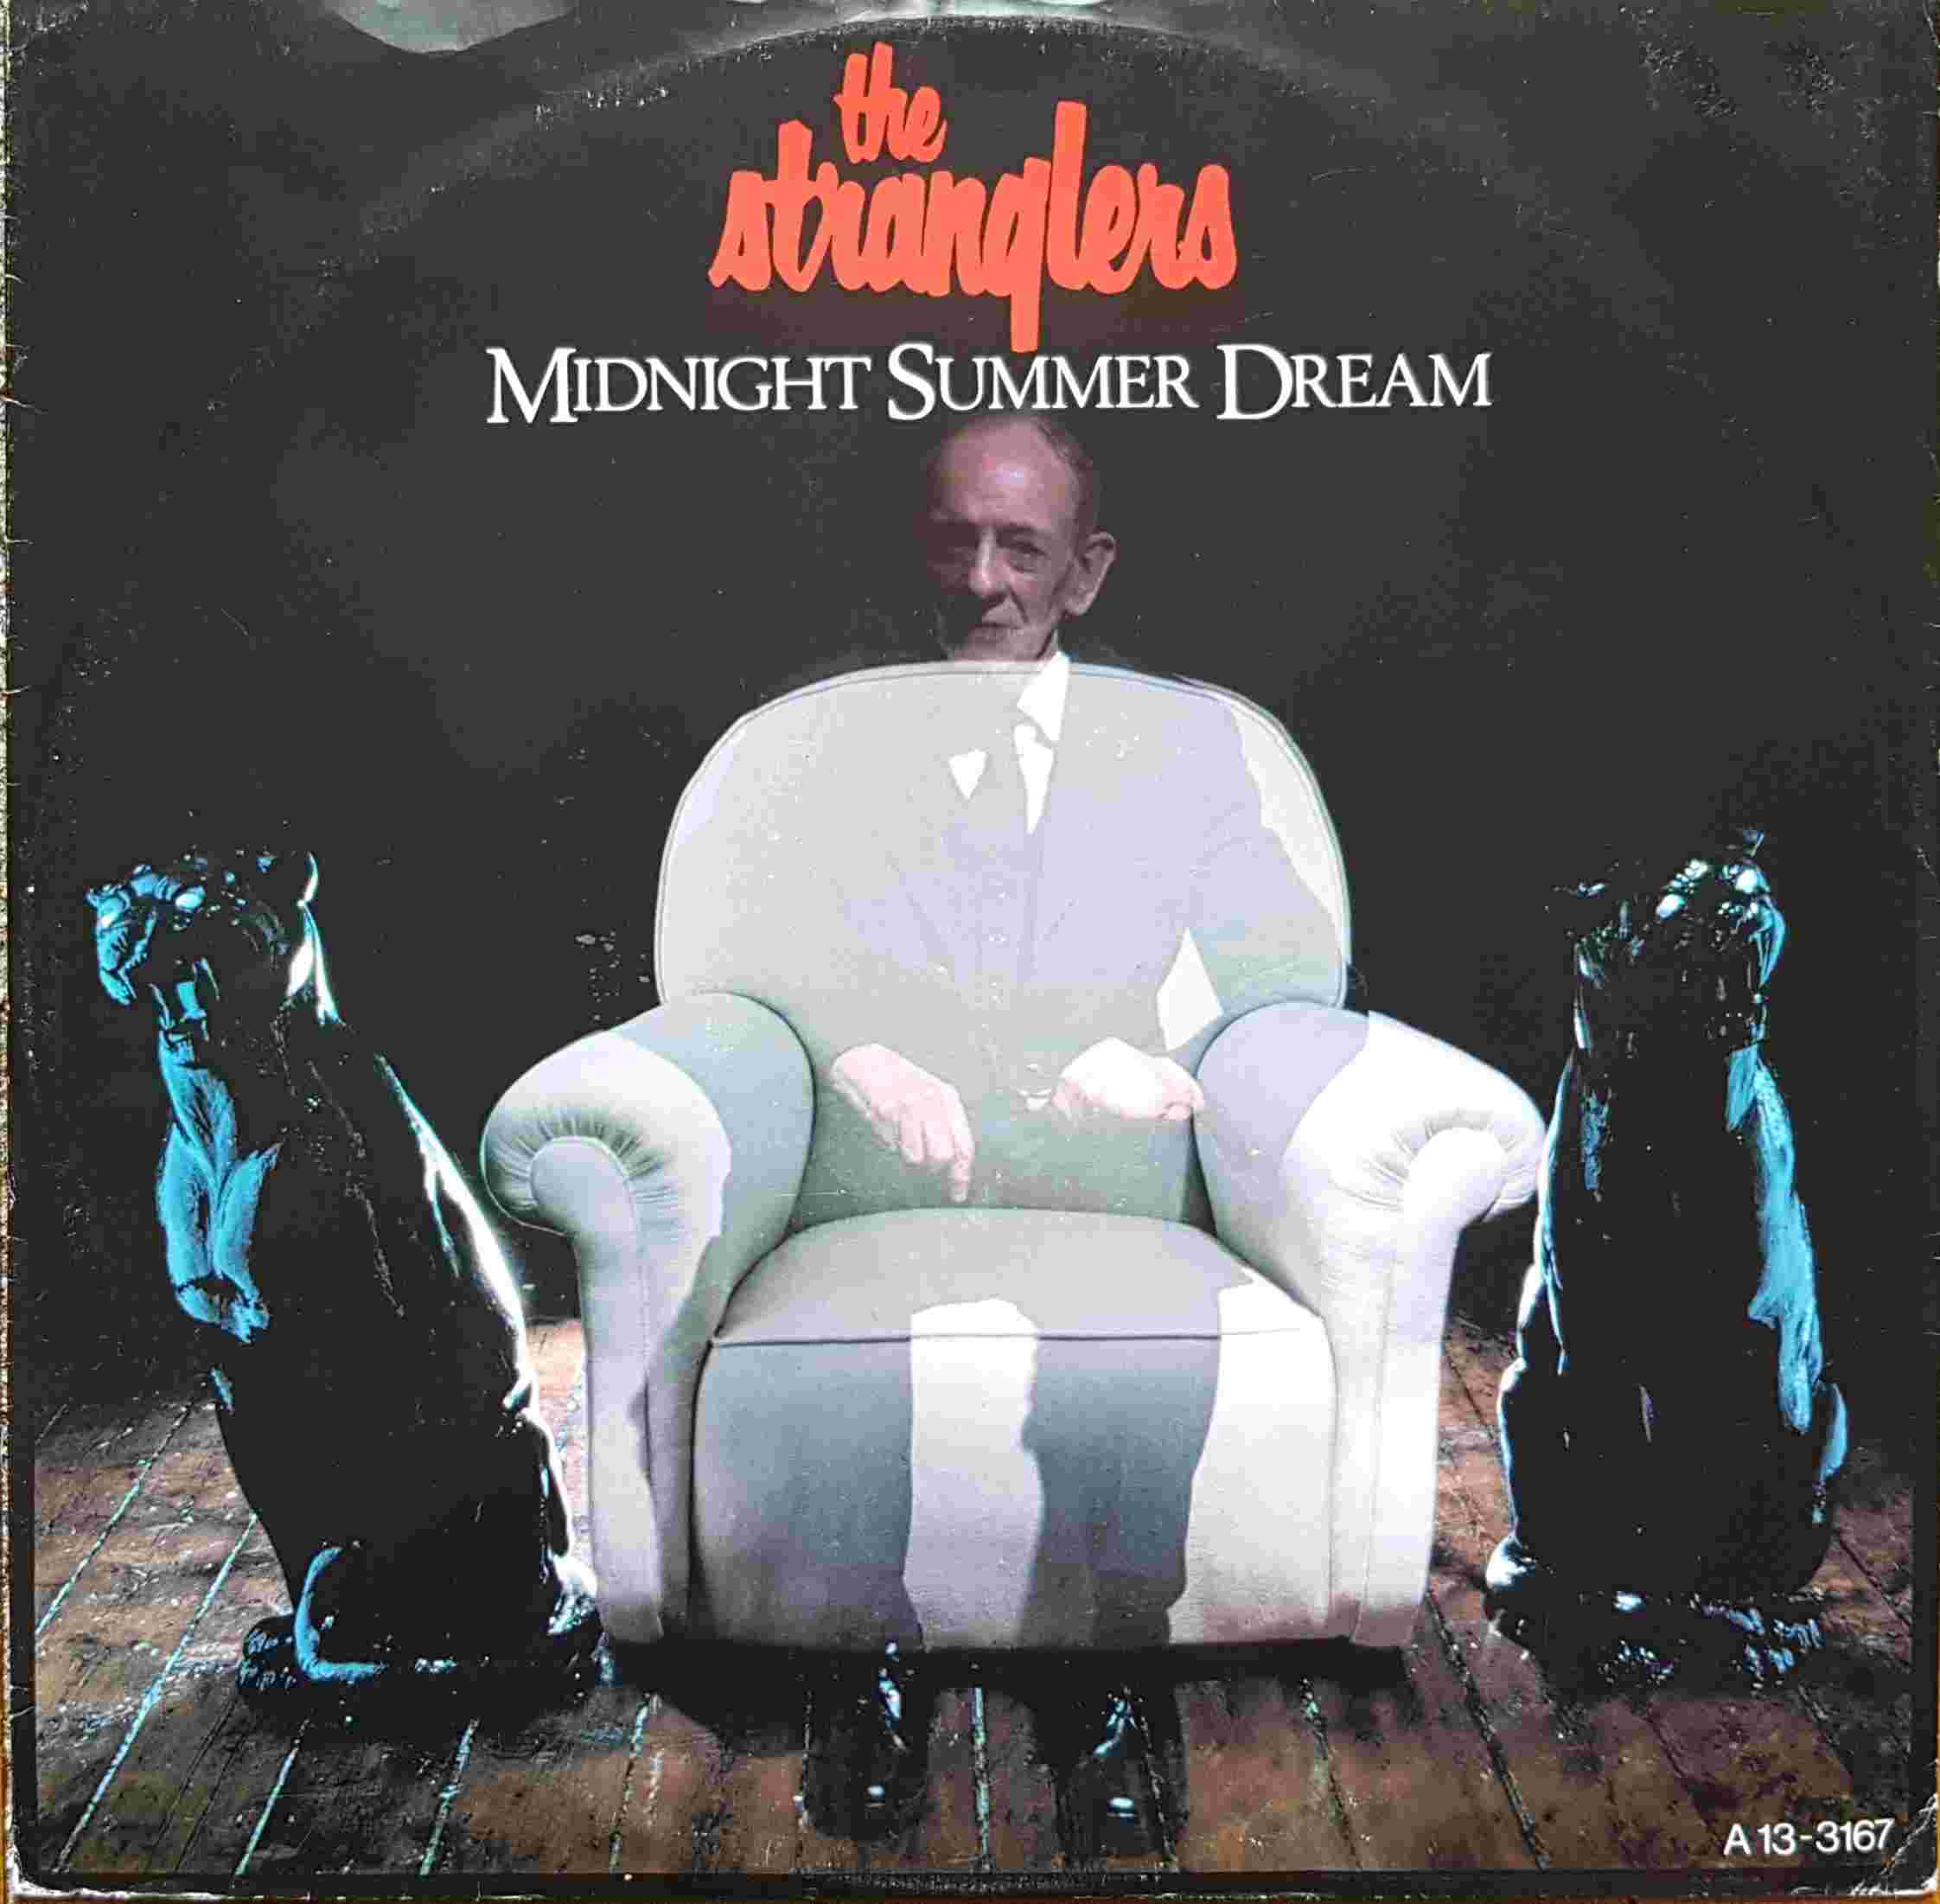 Picture of A13 - 3167 Midnight summer dream (Special single mix) by artist The Stranglers from The Stranglers 12inches